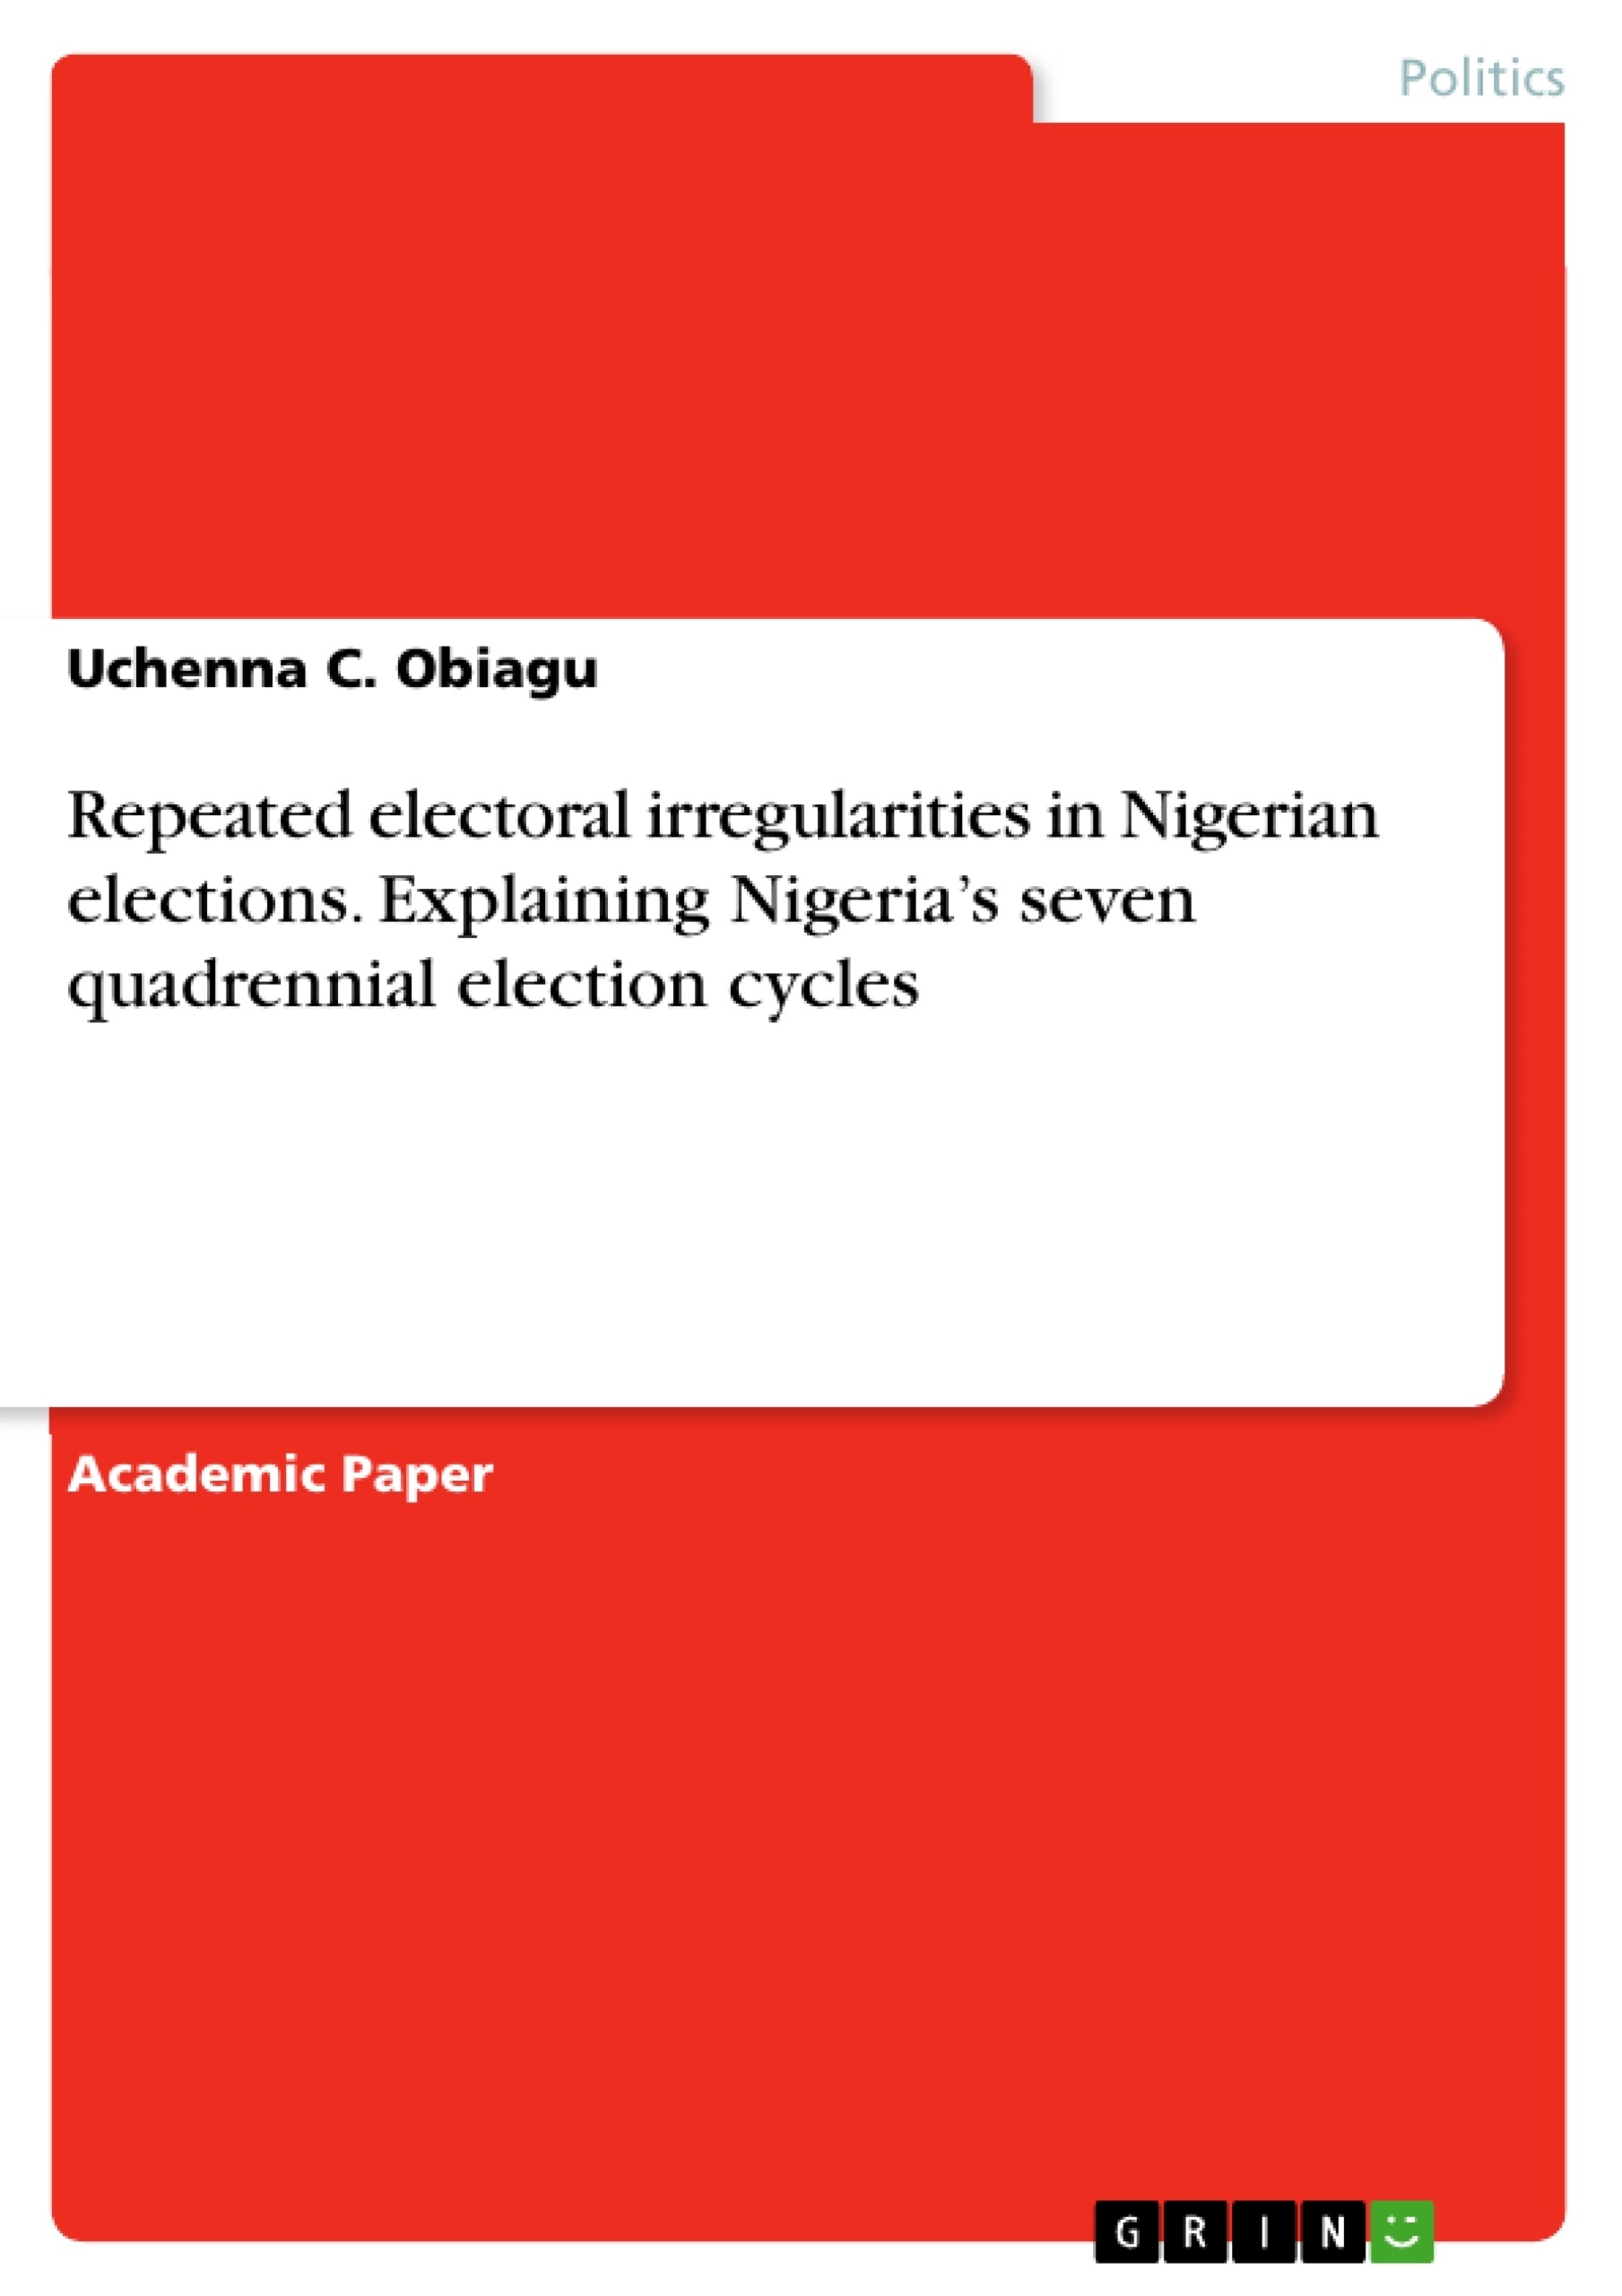 Title: Repeated electoral irregularities in Nigerian elections. Explaining Nigeria’s seven quadrennial election cycles